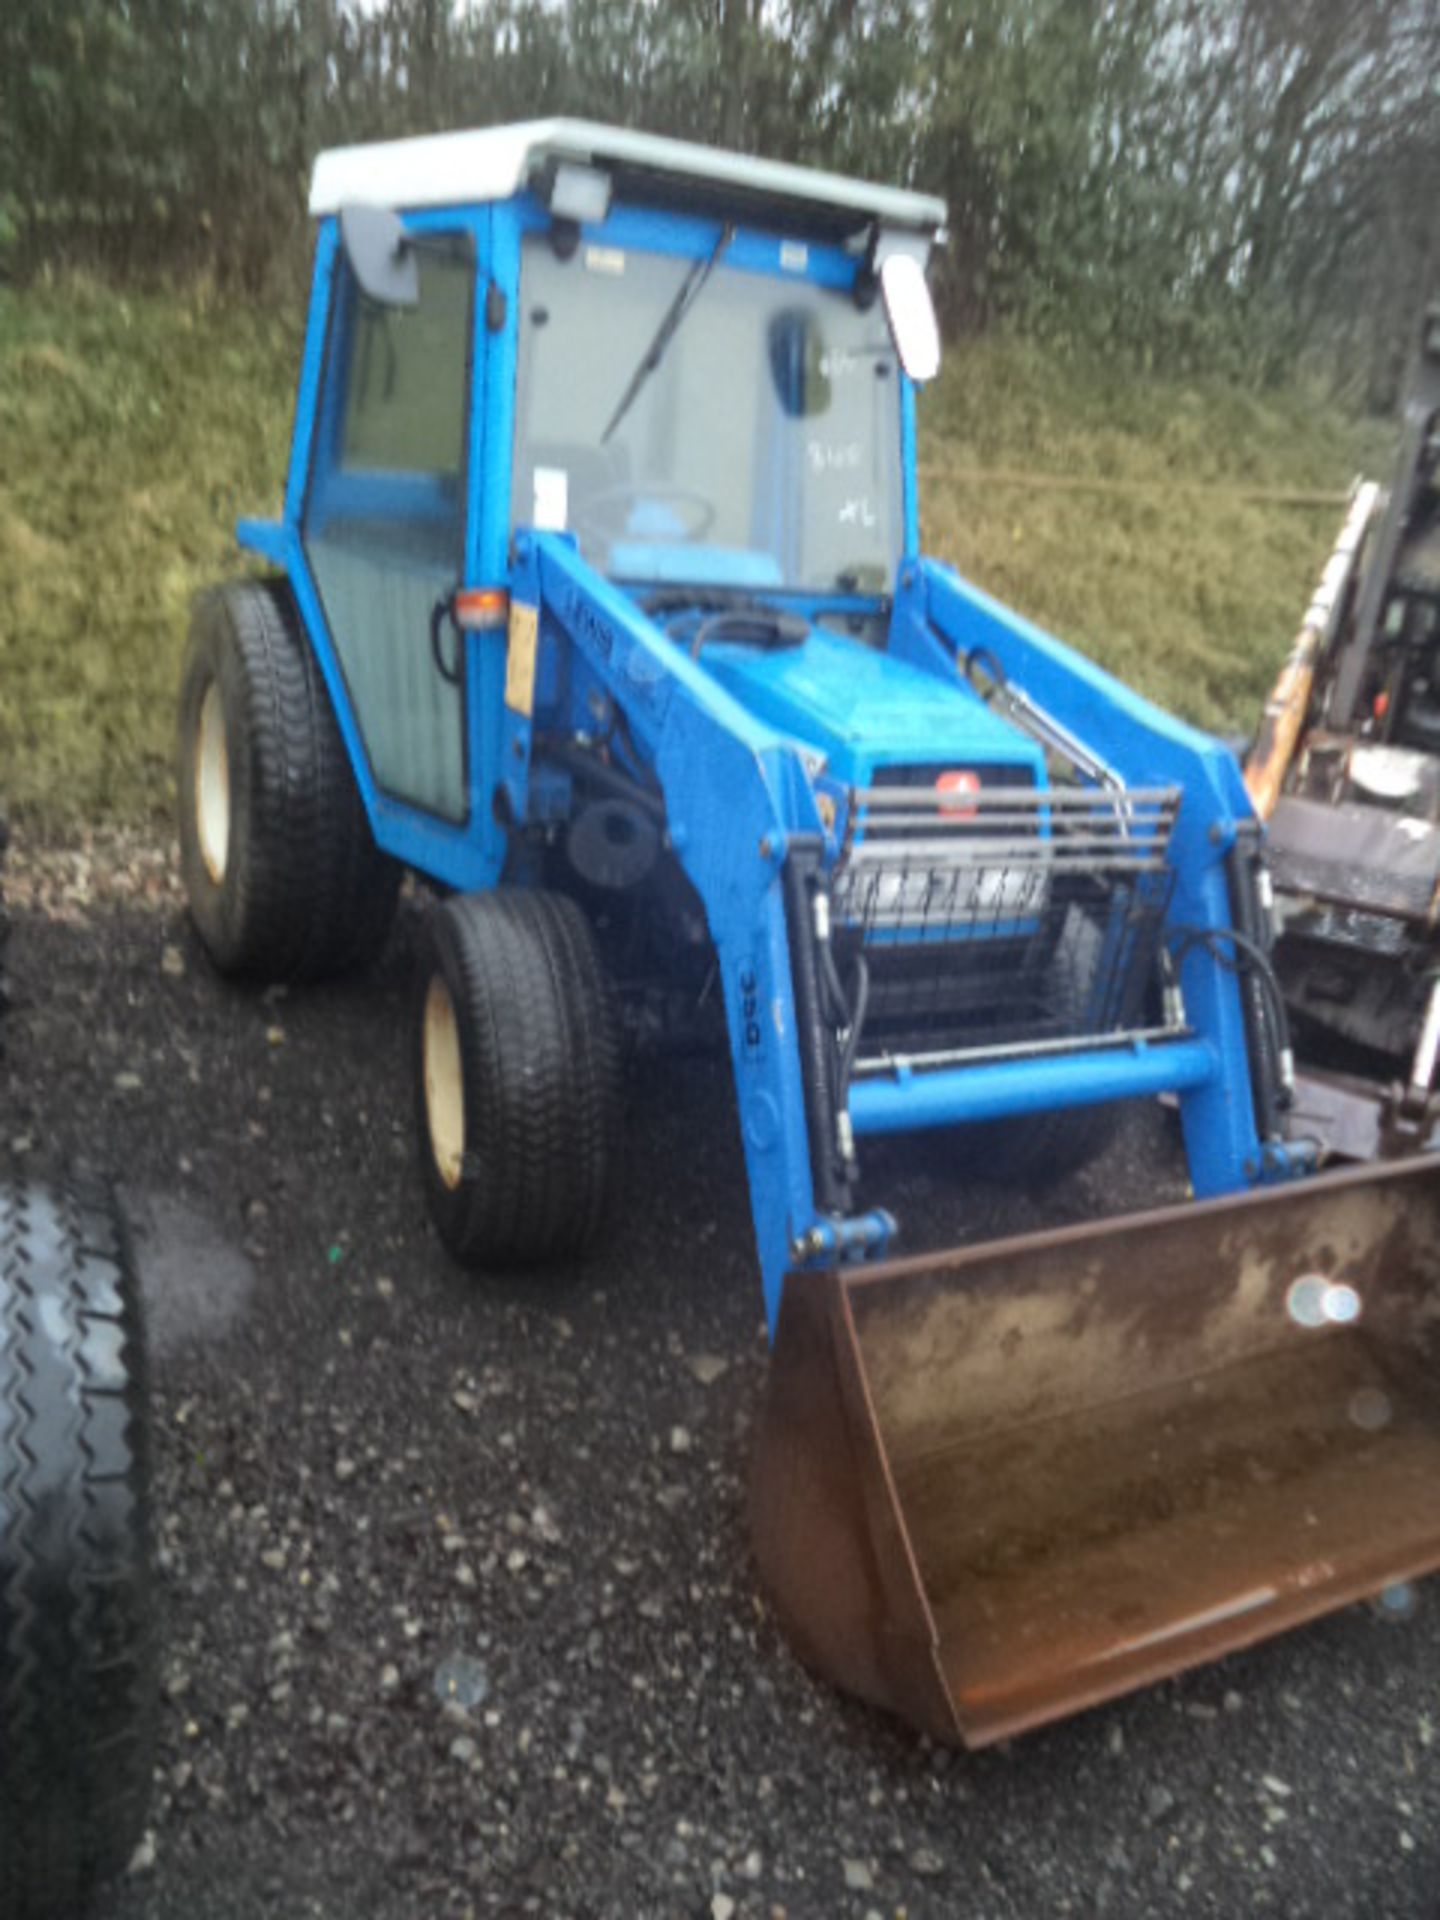 ISEKI TK538 4wd compact tractor c/w full cab & front loader & bucket, 3220 recorded hrs (R&D) - Image 2 of 3